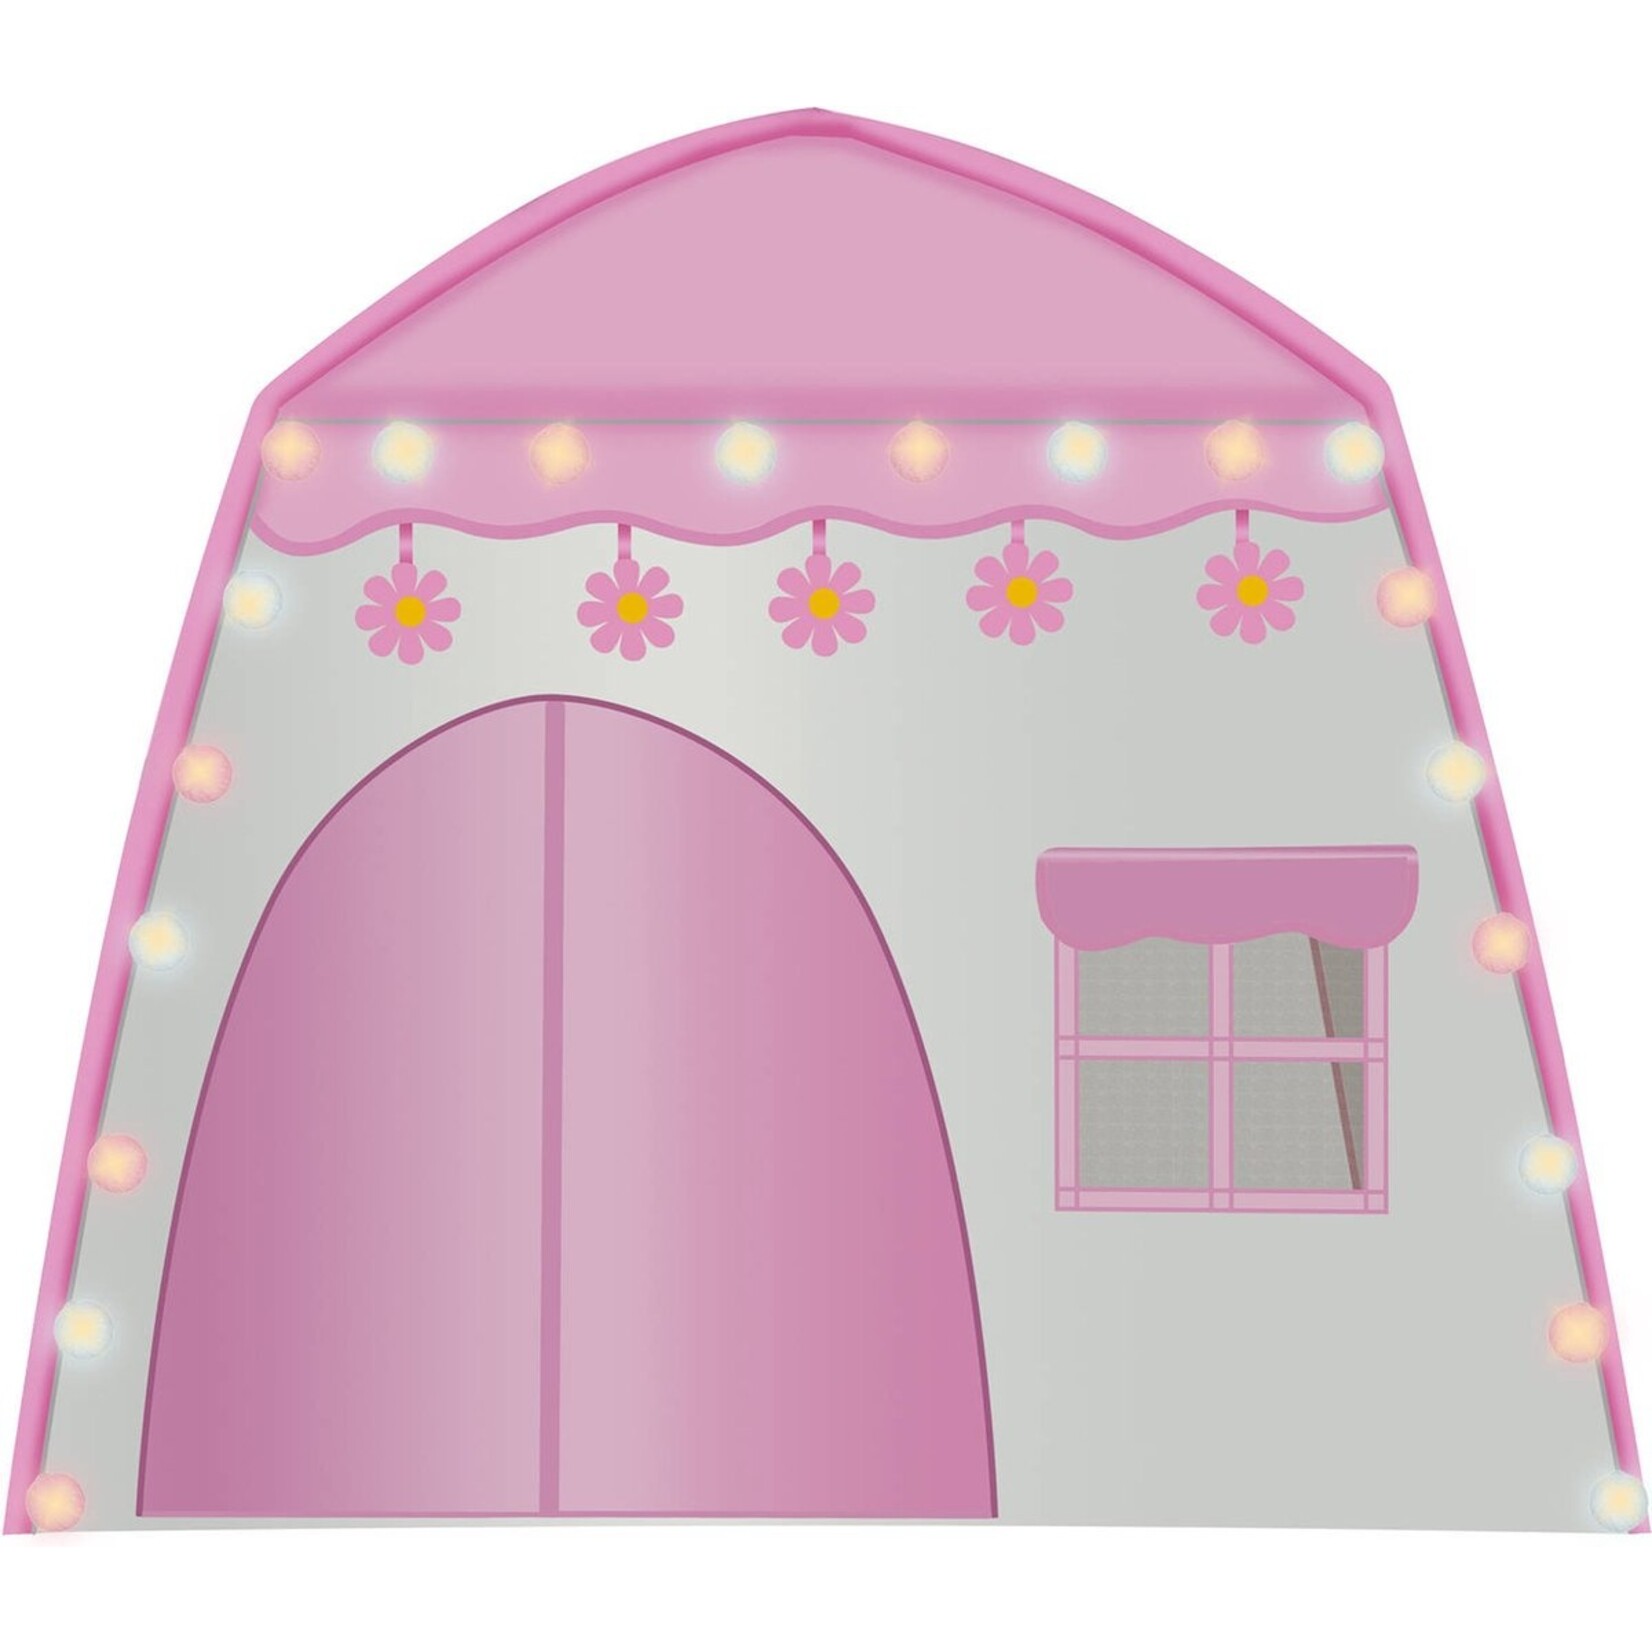 Parya Parya Home - Play Tent XL - With LED Lights - Pink Tent - For Children